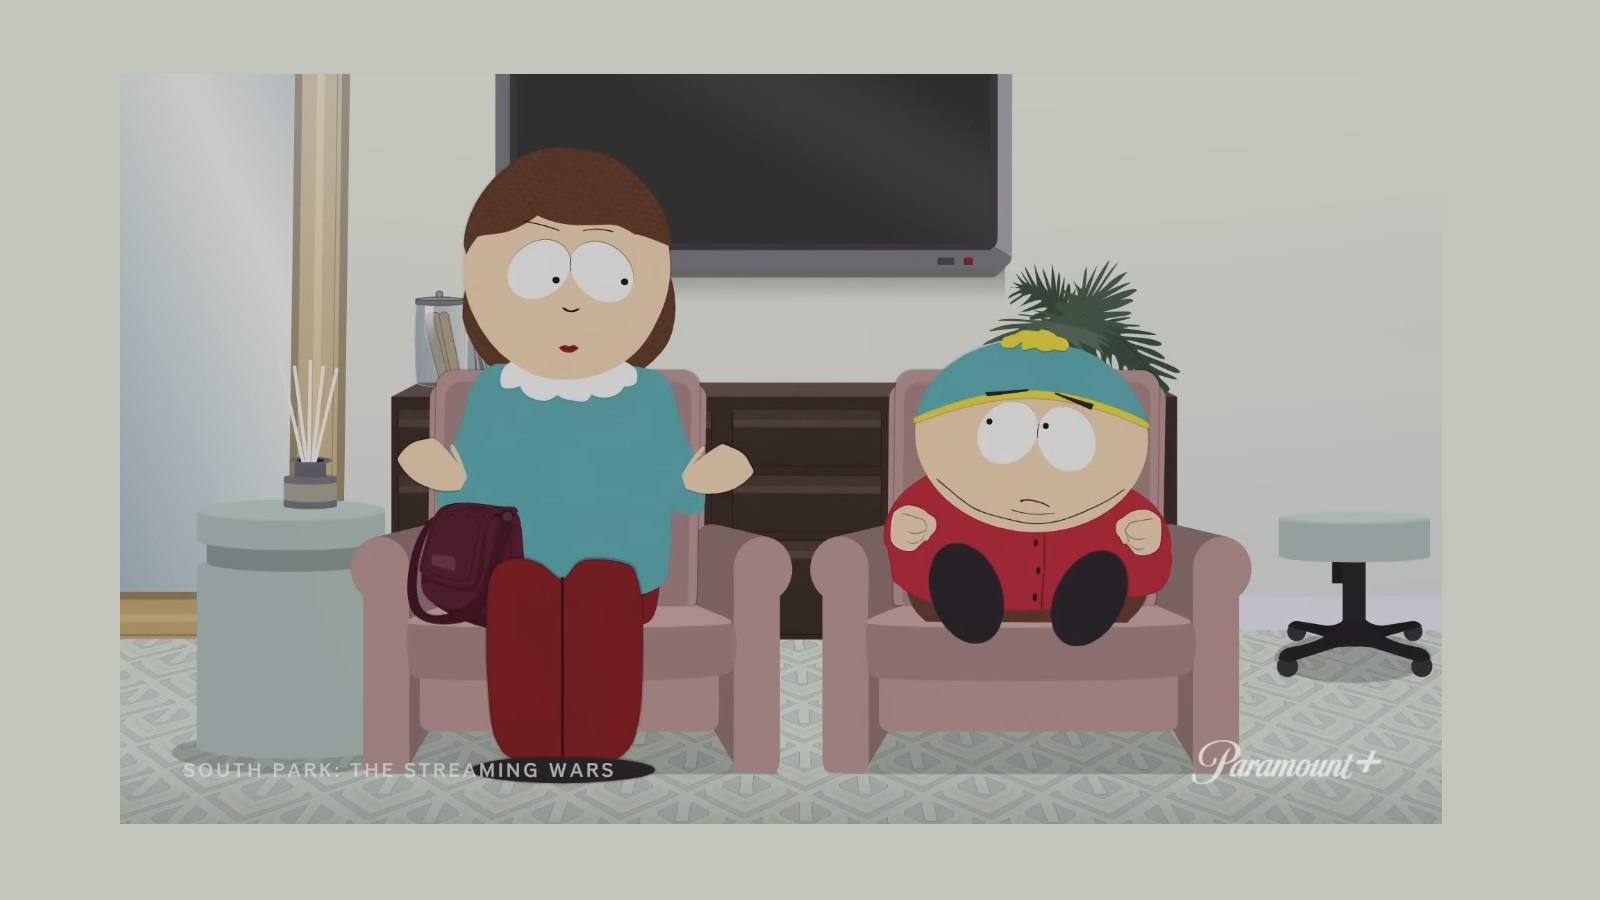 How to Watch South Park: The Streaming Wars Online From Anywhere